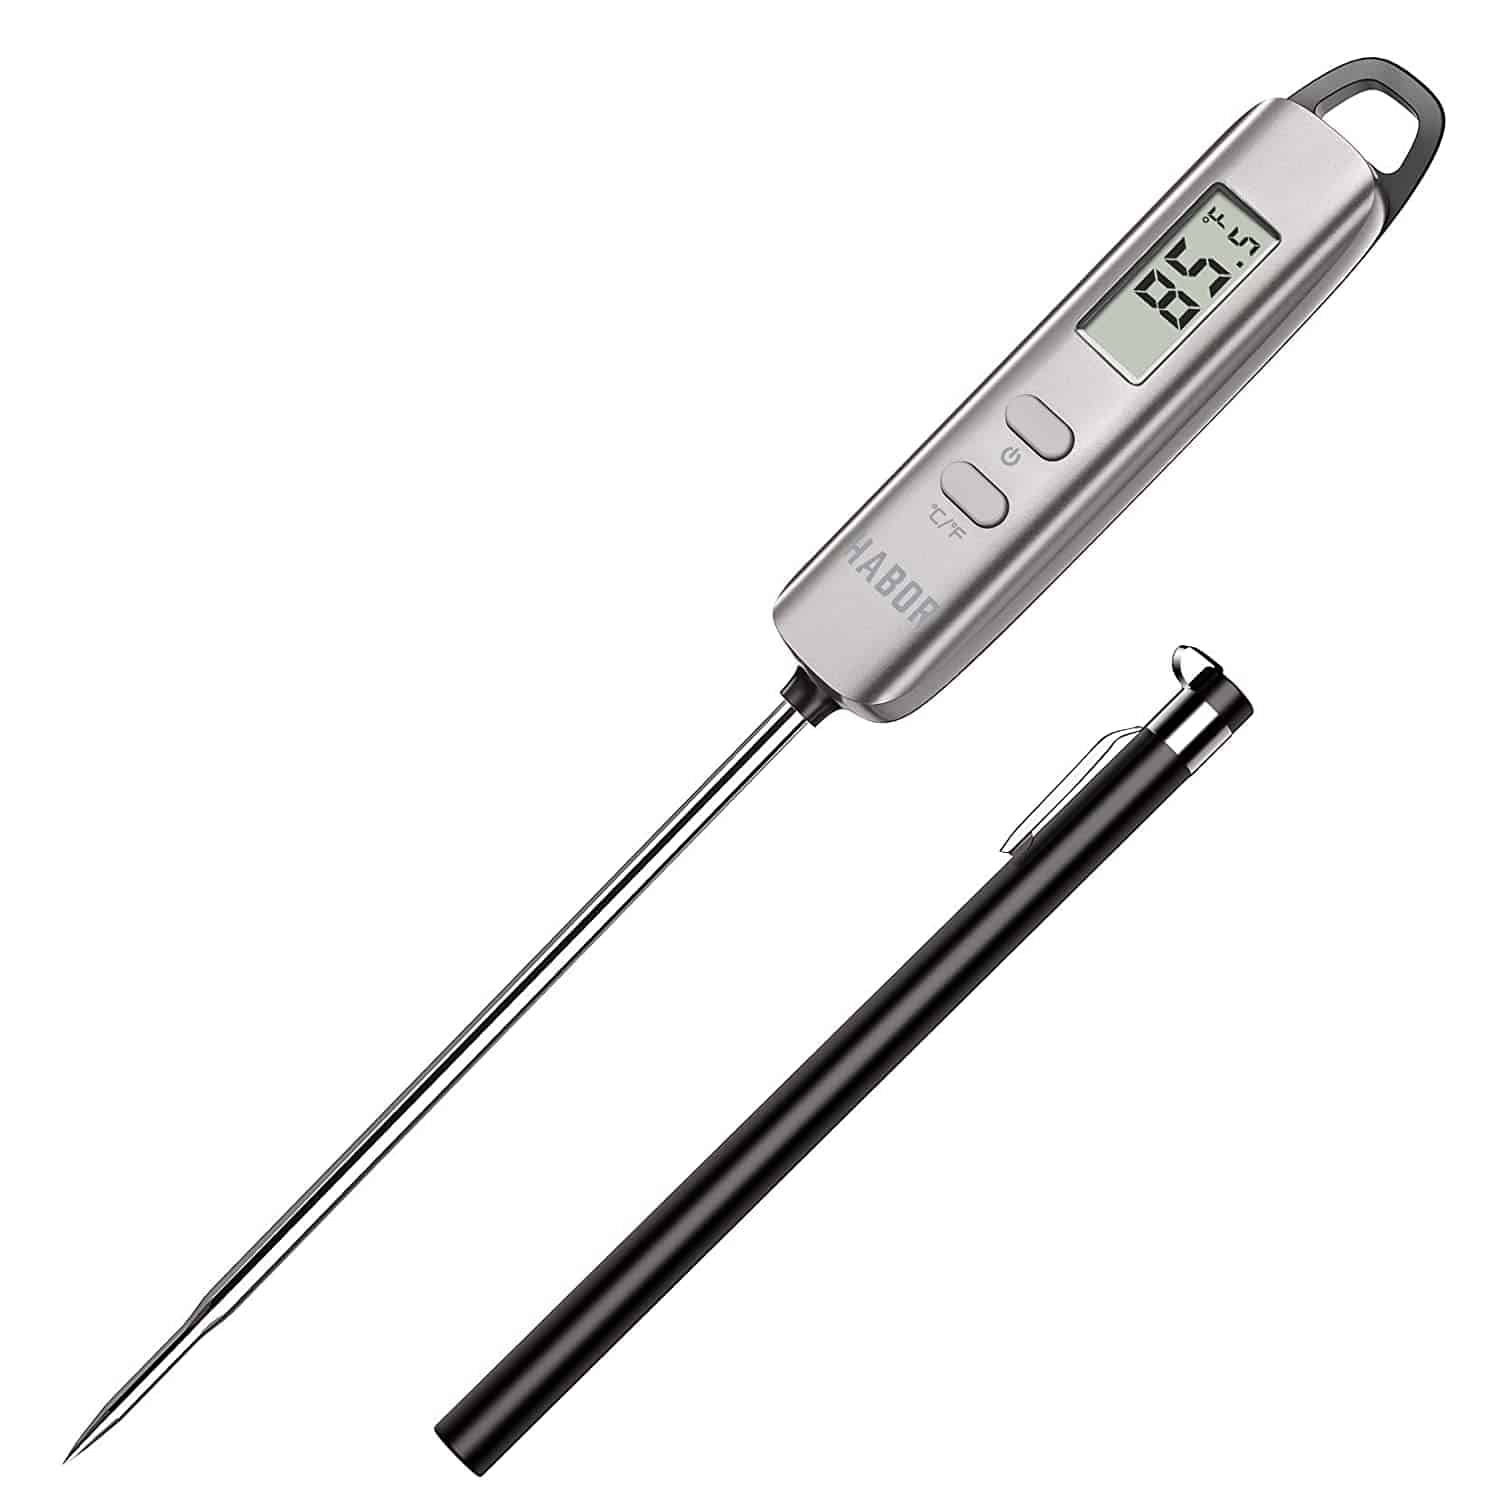 Best budget instant-read thermometer- Habor 022